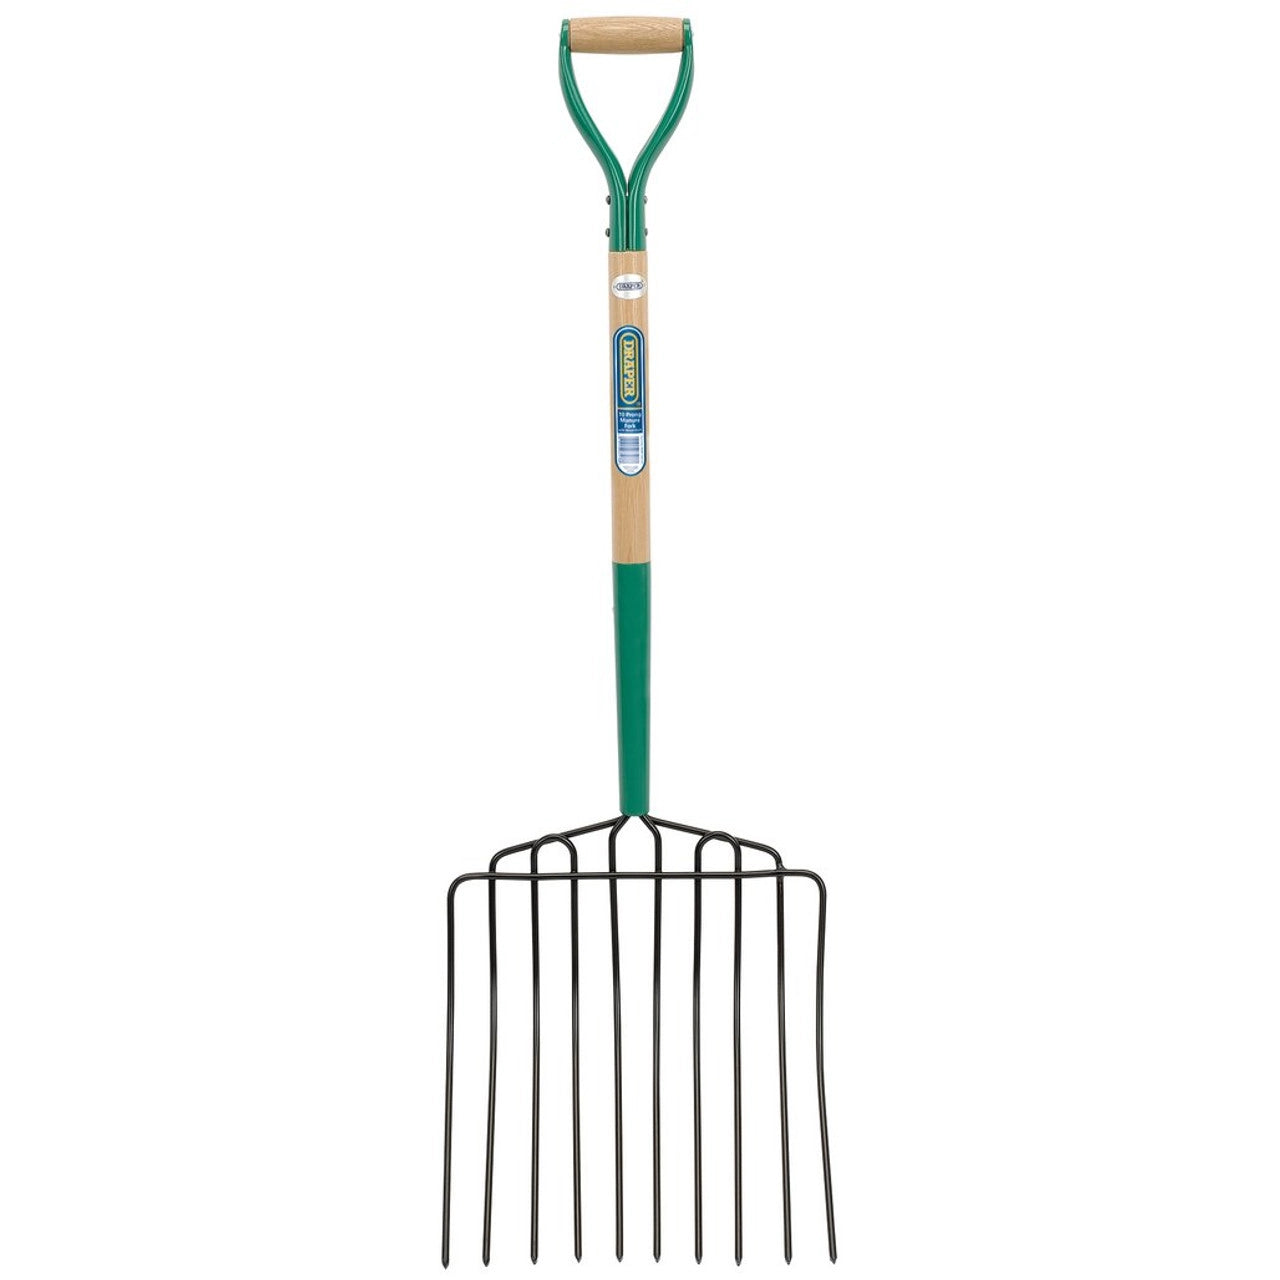 Draper 63578 10 Prong Manure Fork with Wood Shaft and MYD Handle